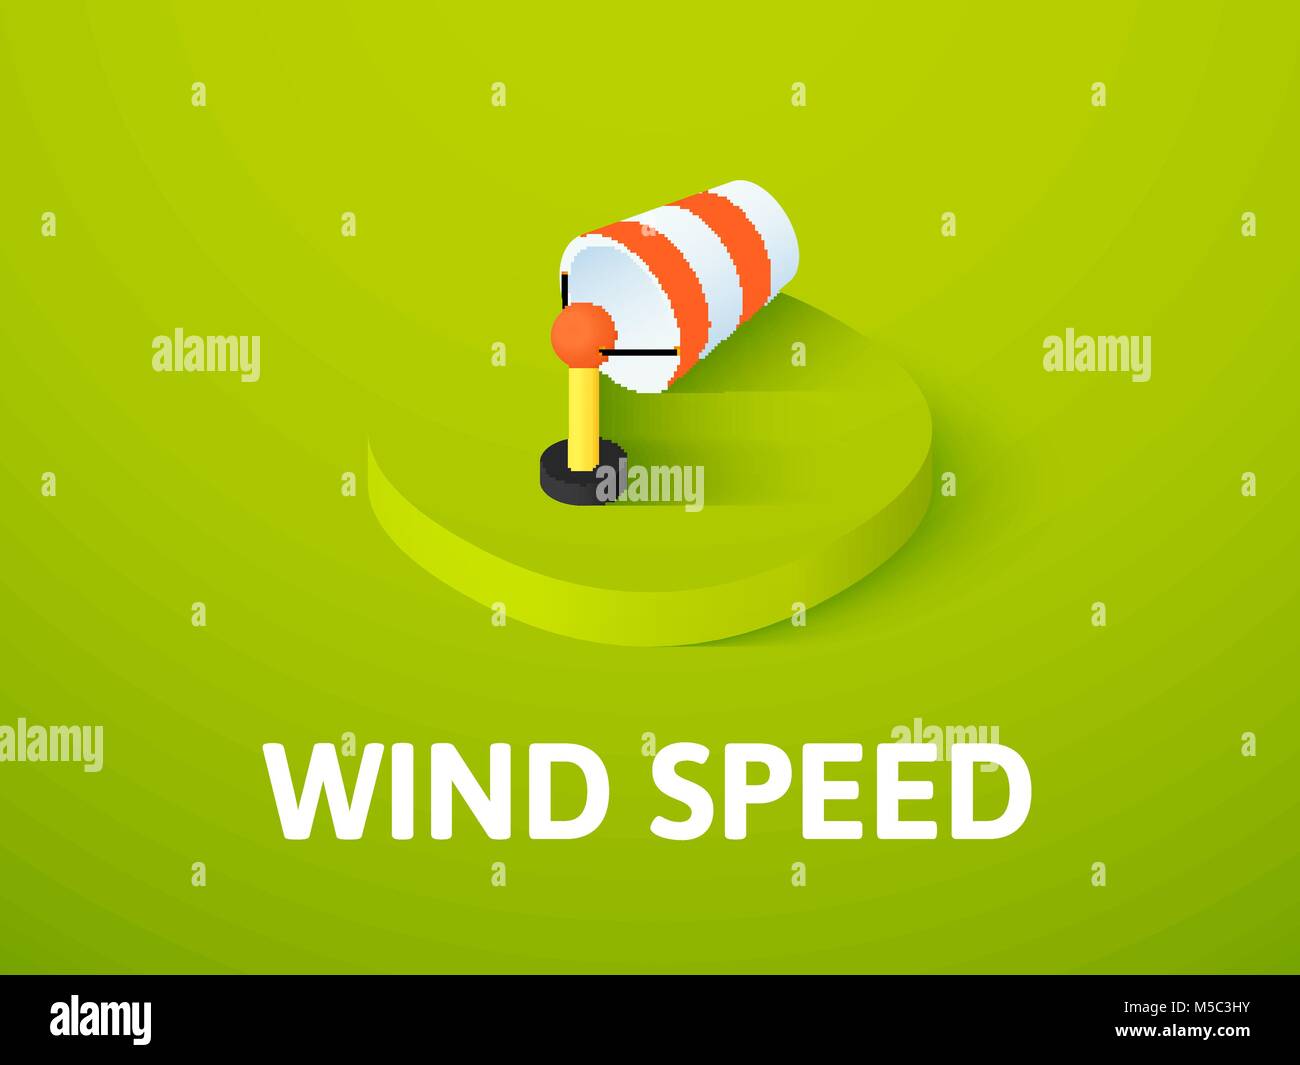 Wind speed isometric icon, isolated on color background Stock Vector